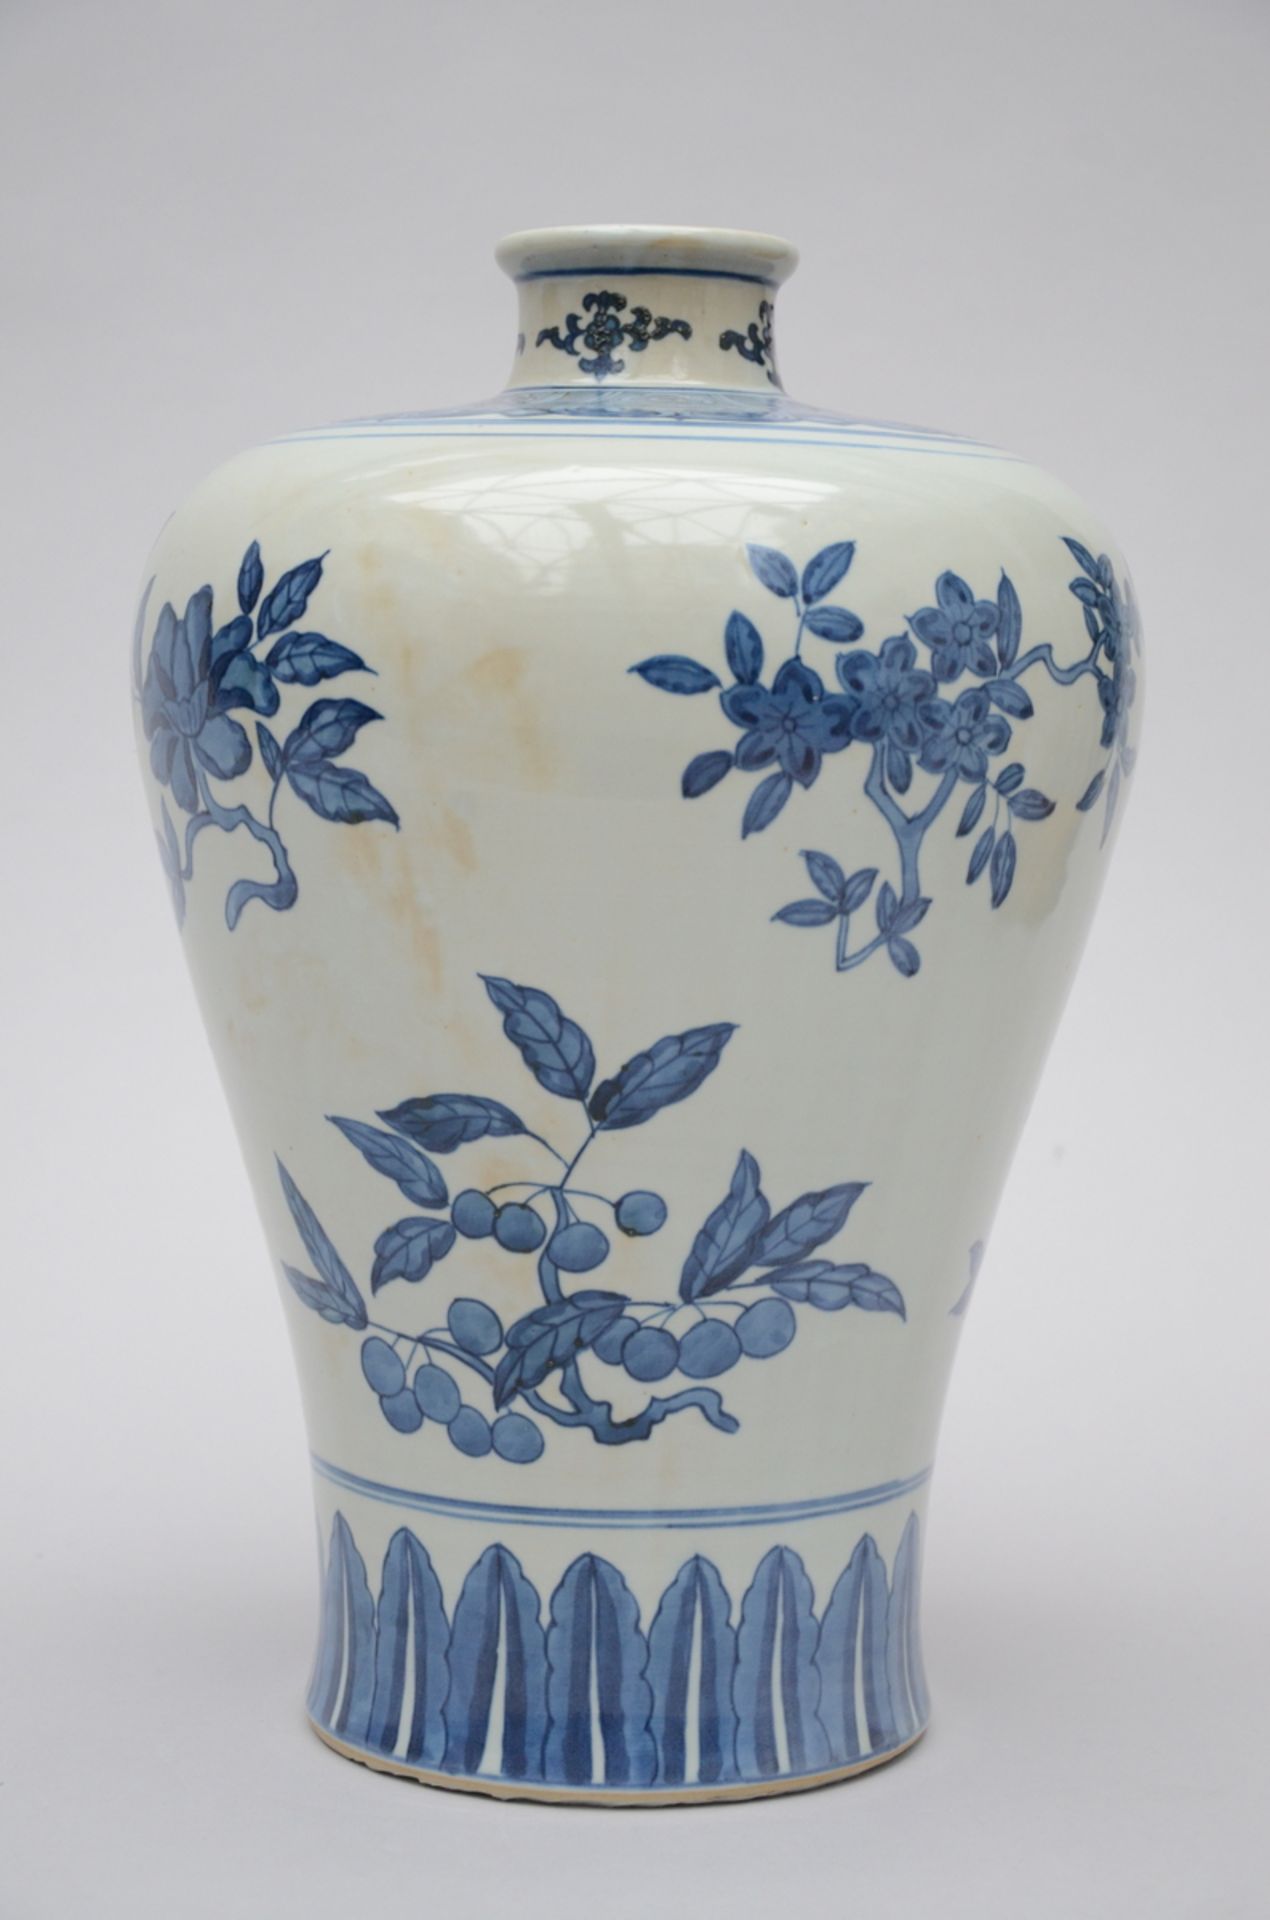 Chinese Meiping vase in blue and white porcelain, 20th century (38 cm) - Image 2 of 4